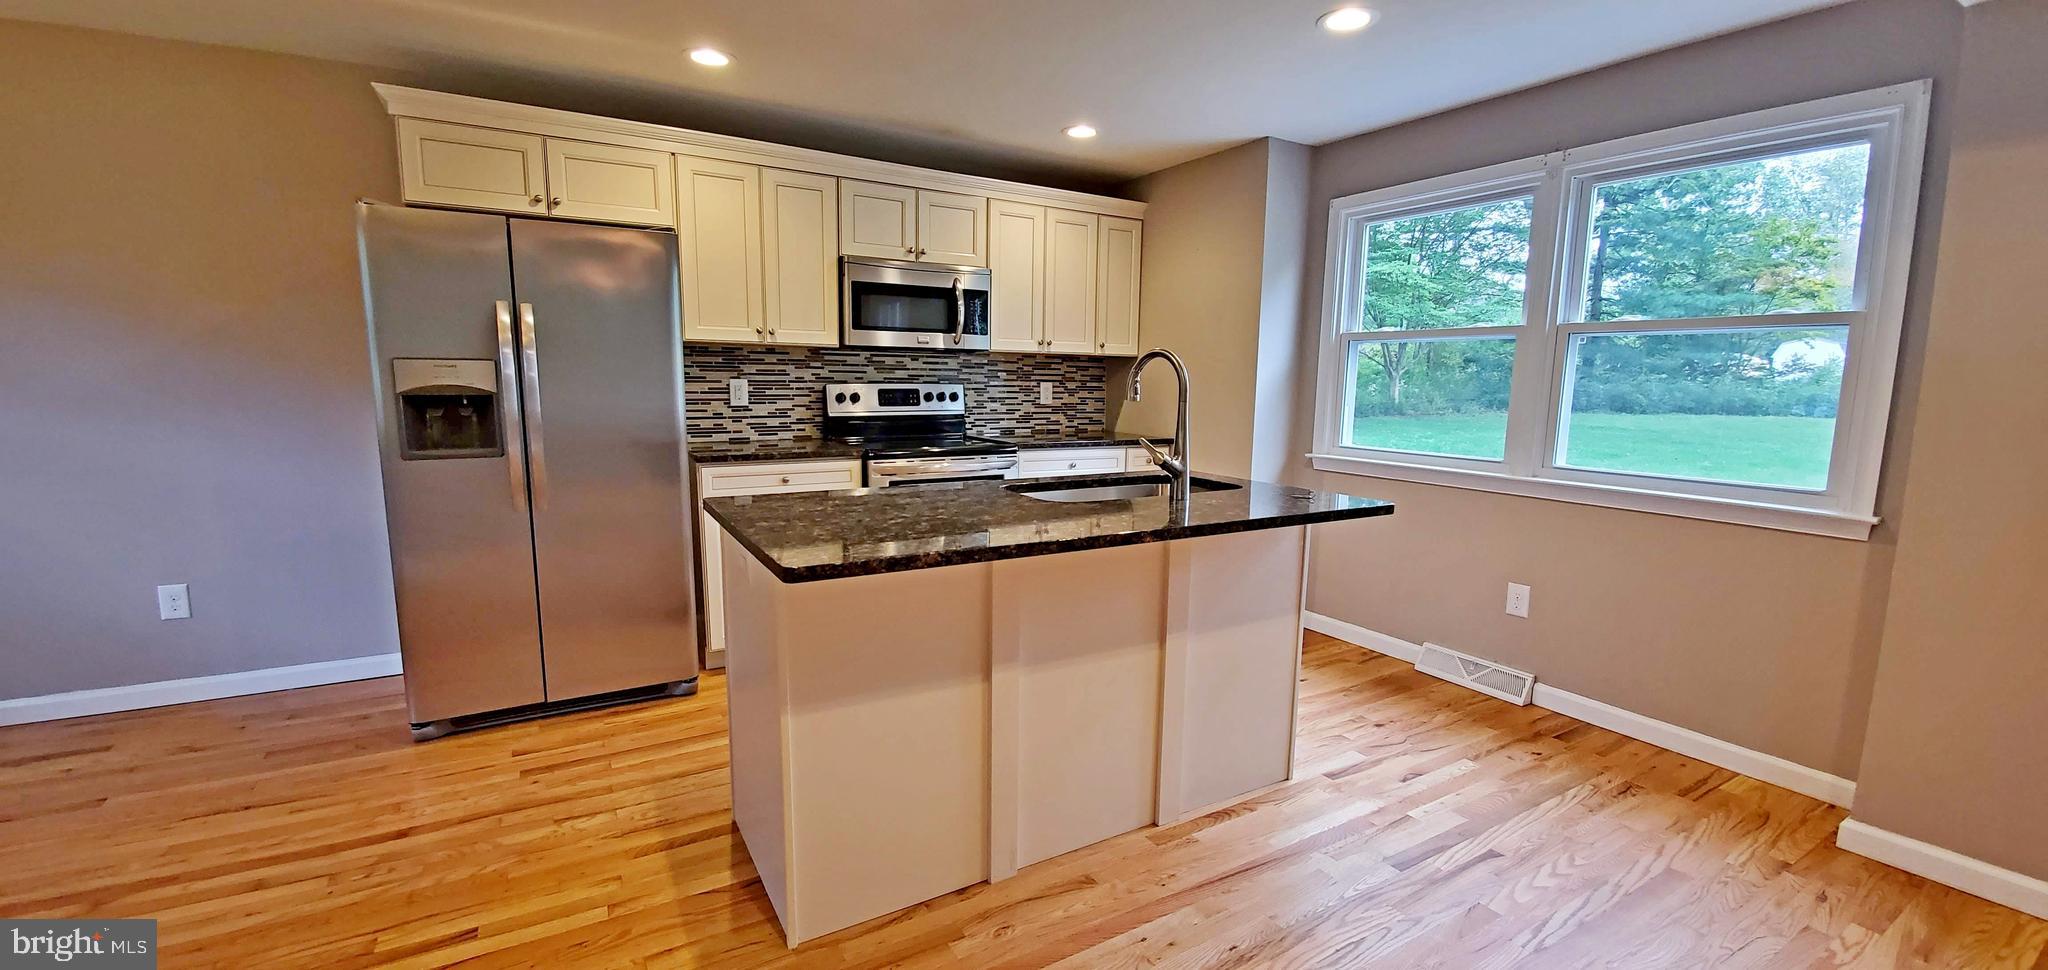 a kitchen with kitchen island granite countertop stainless steel appliances a refrigerator microwave and stove